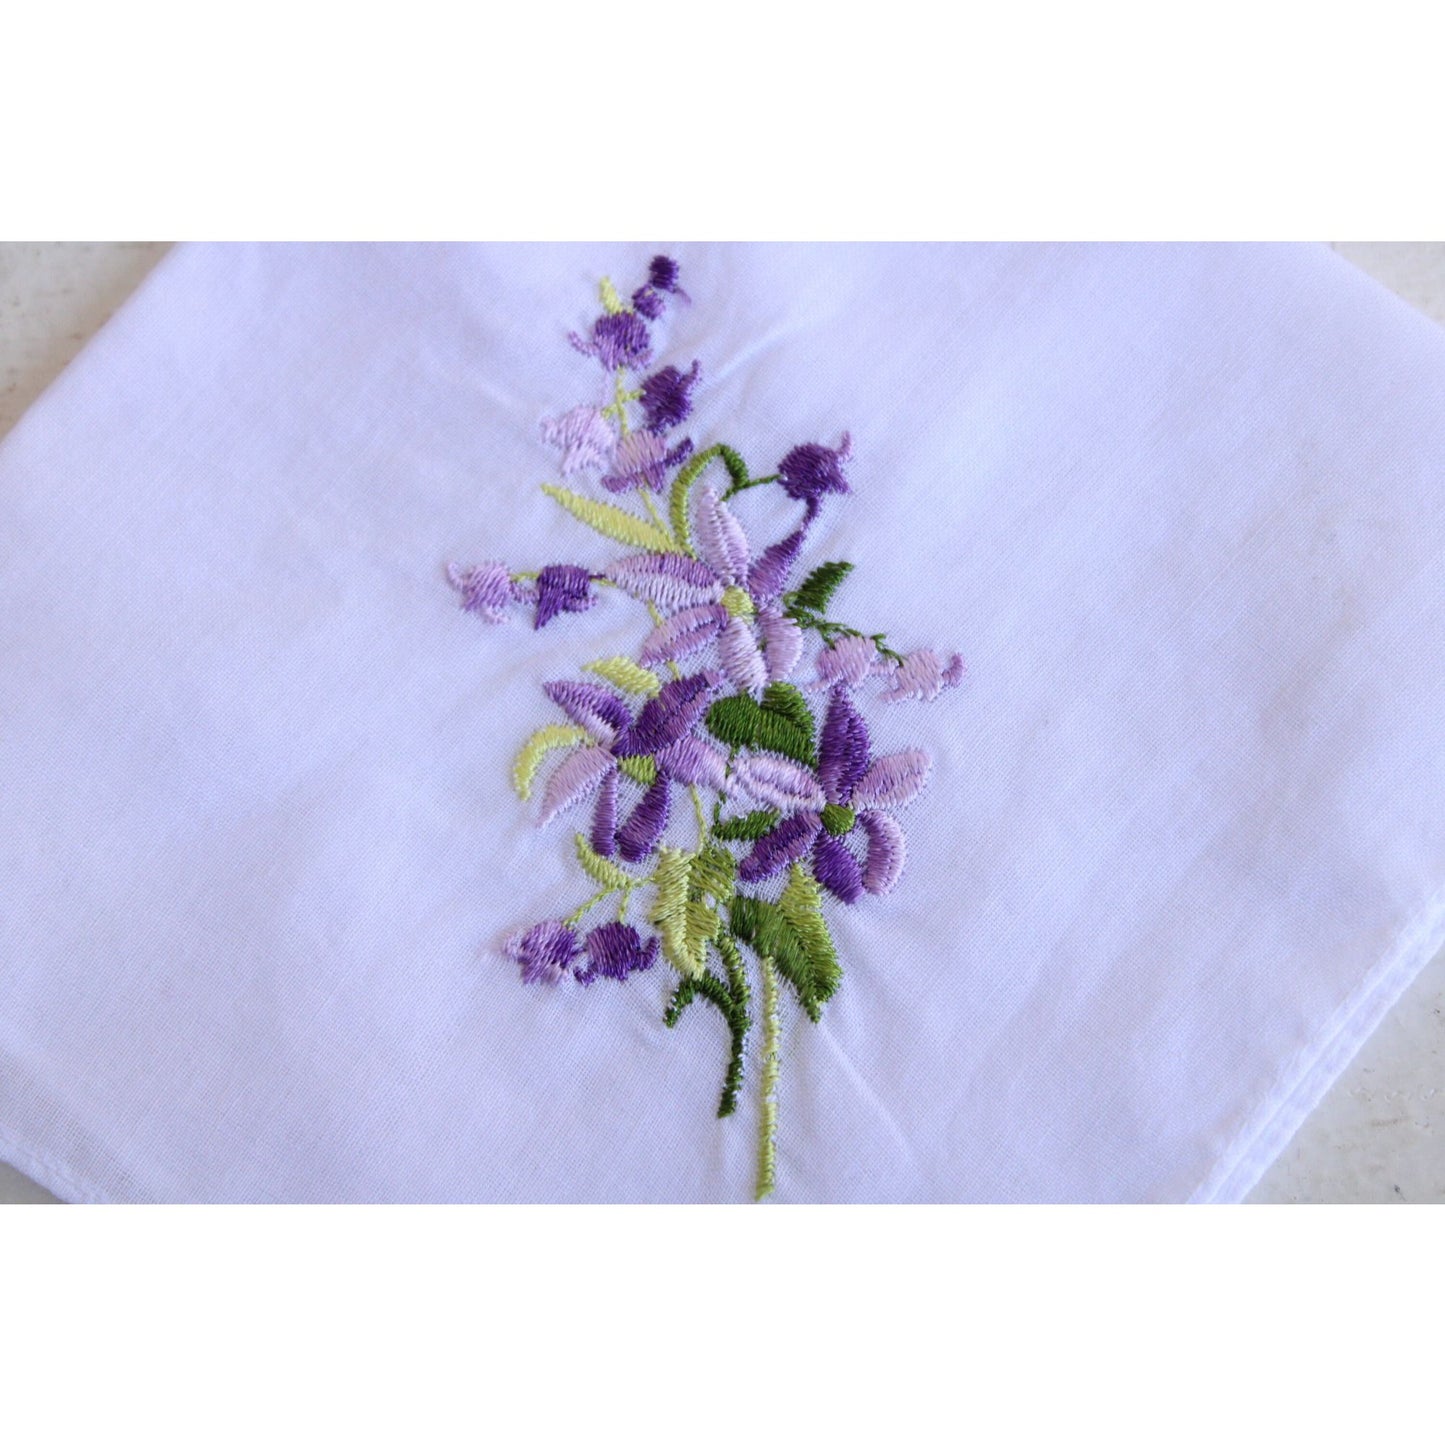 Vintage White Cotton With Purple Embroidered Flowers Hankie